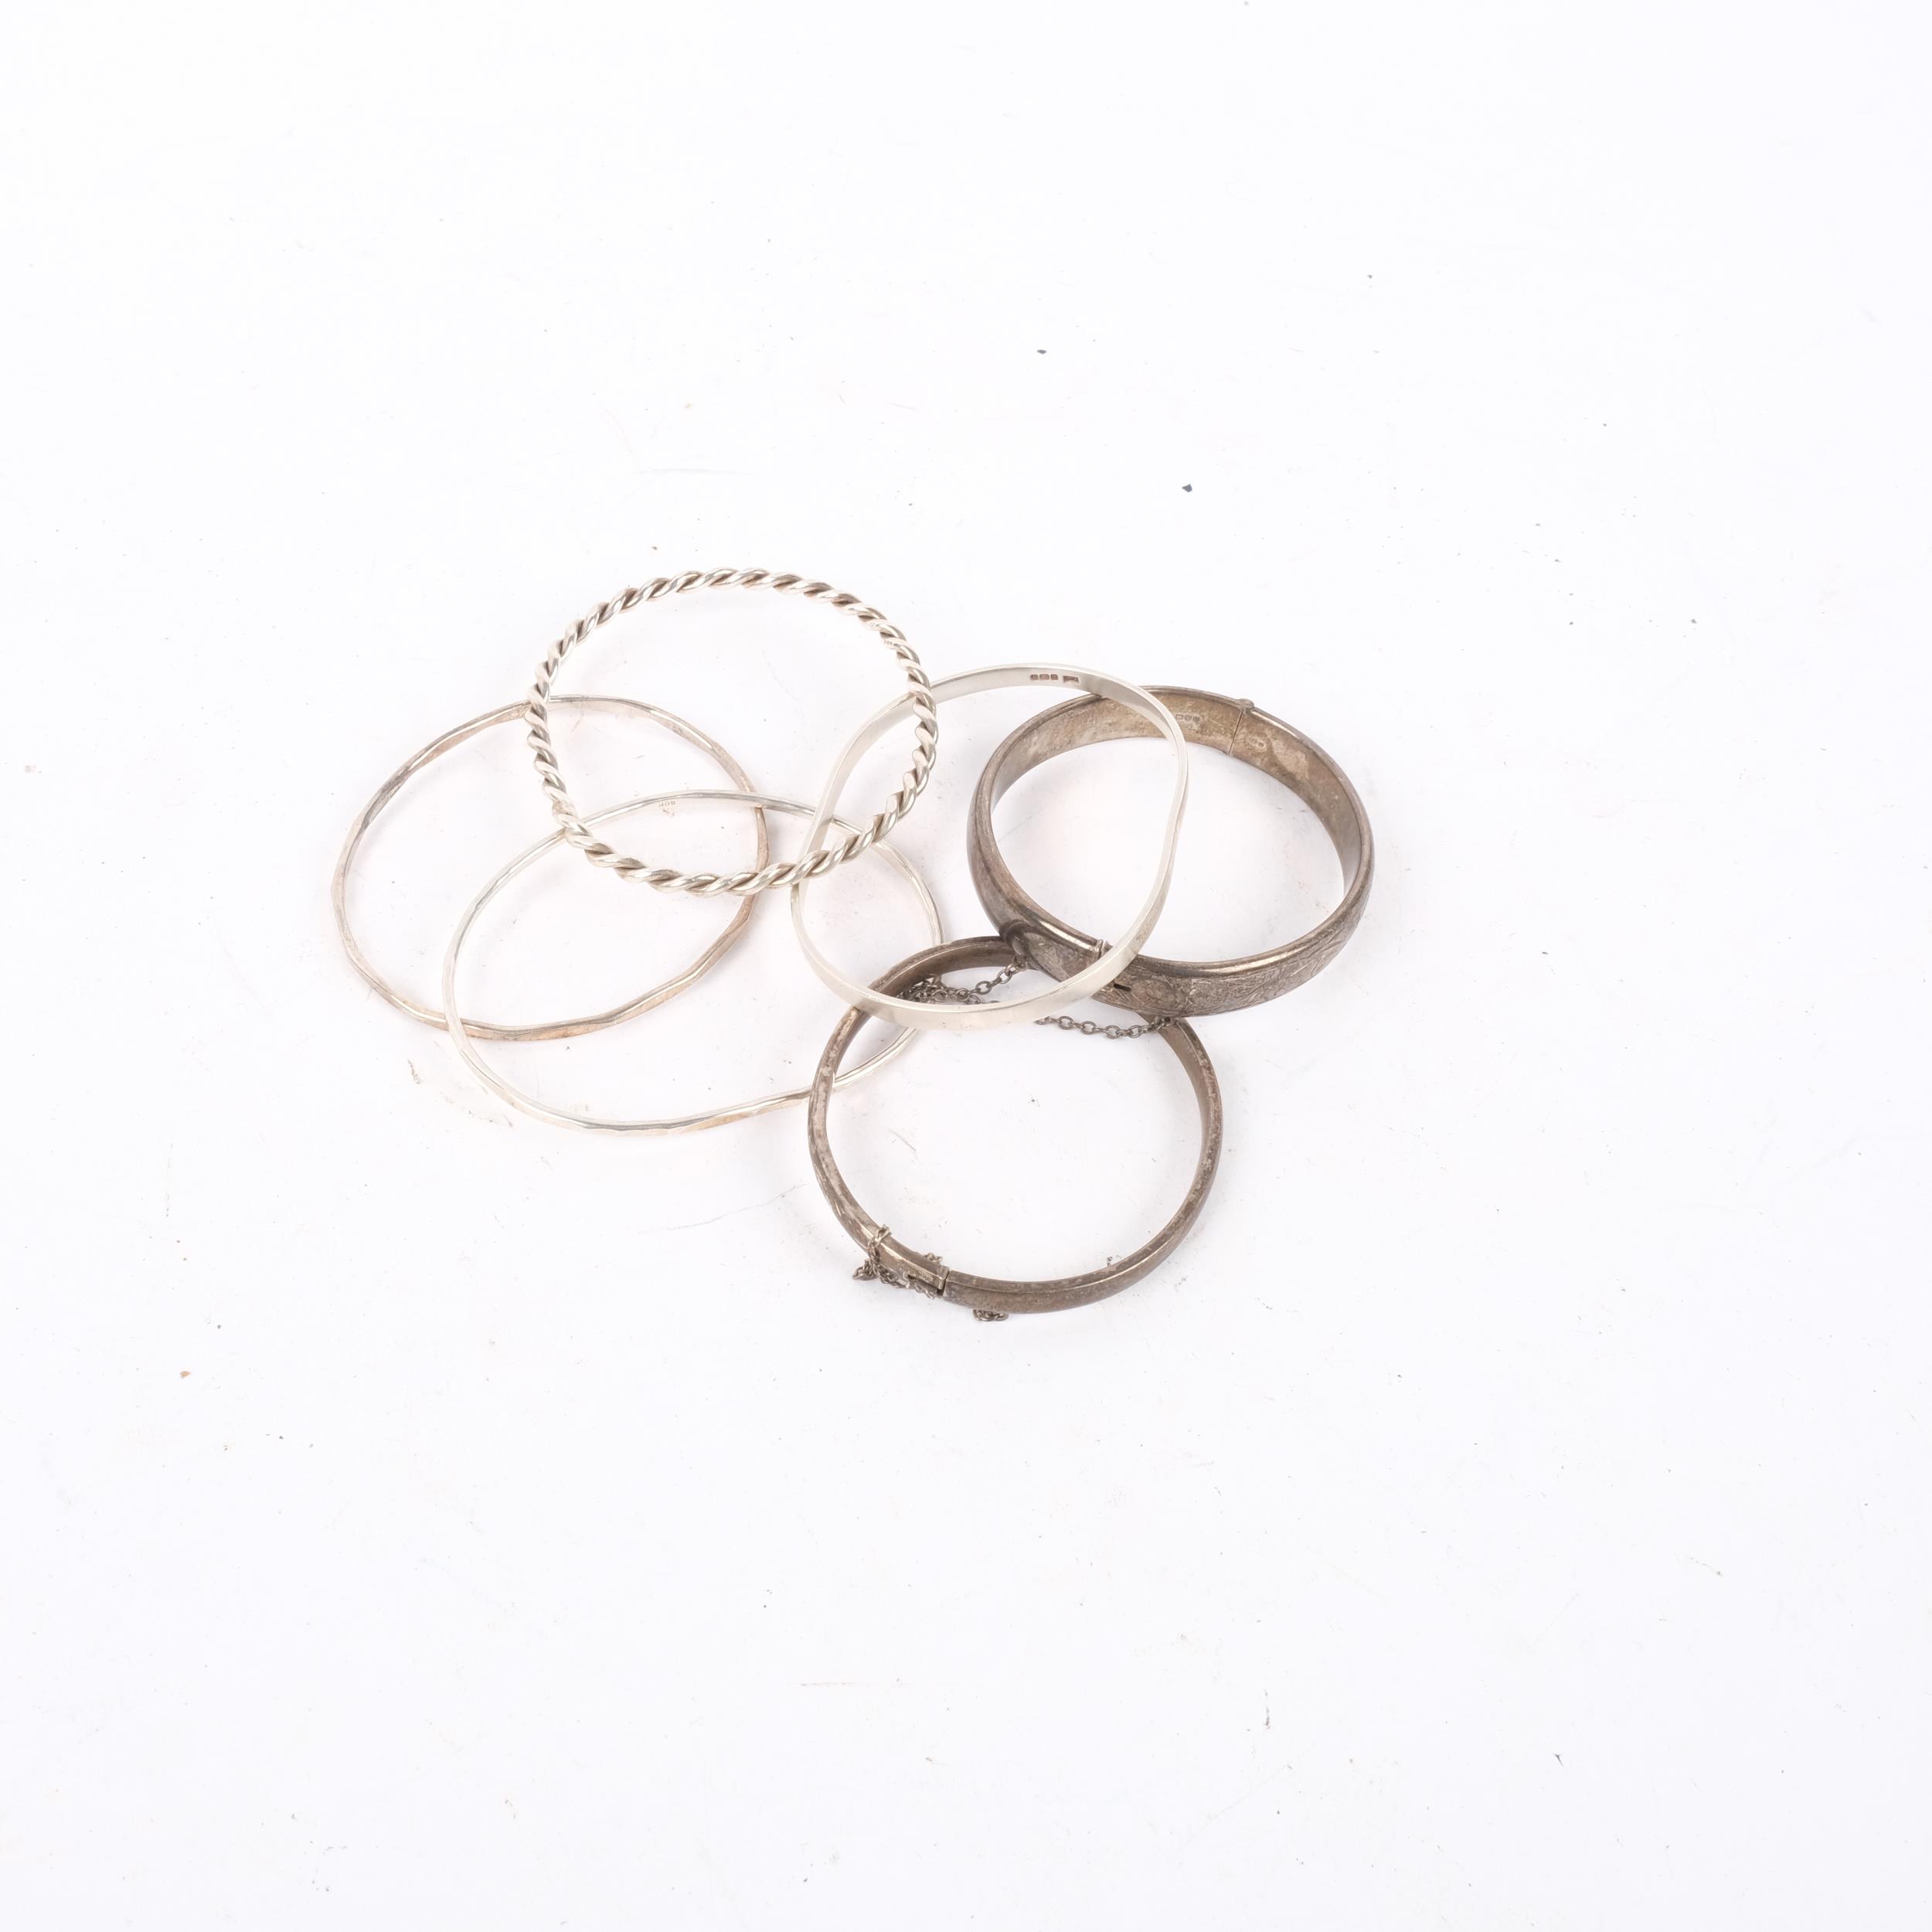 4 silver bangles, and 2 unmarked white metal examples (6) - Image 2 of 2